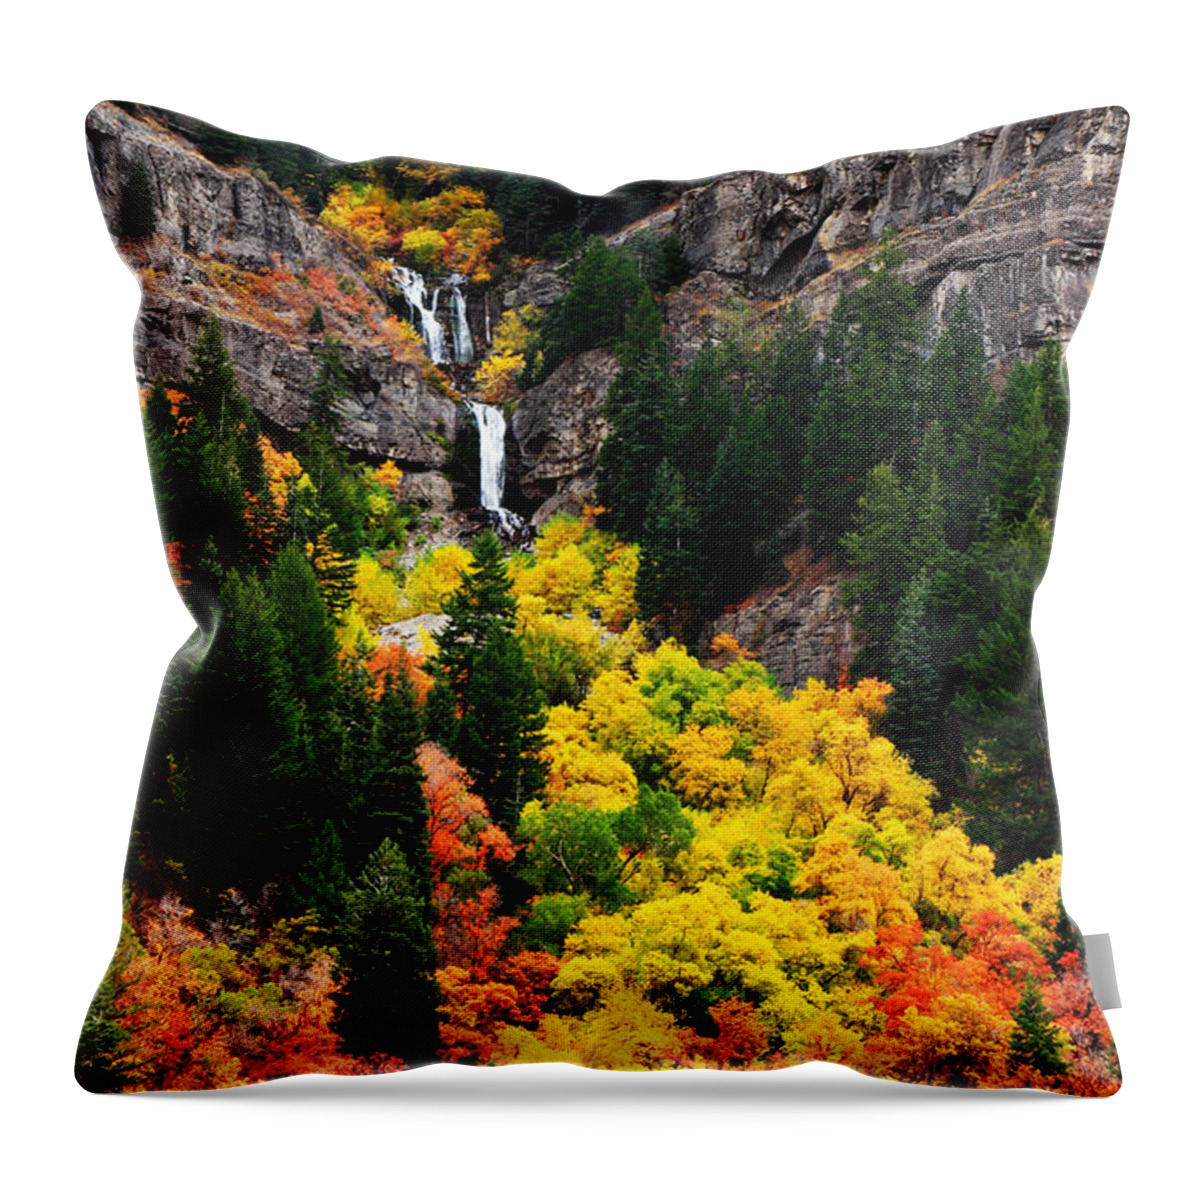 Water Throw Pillow featuring the photograph Provo Canyon Falls, Utah by TL Mair